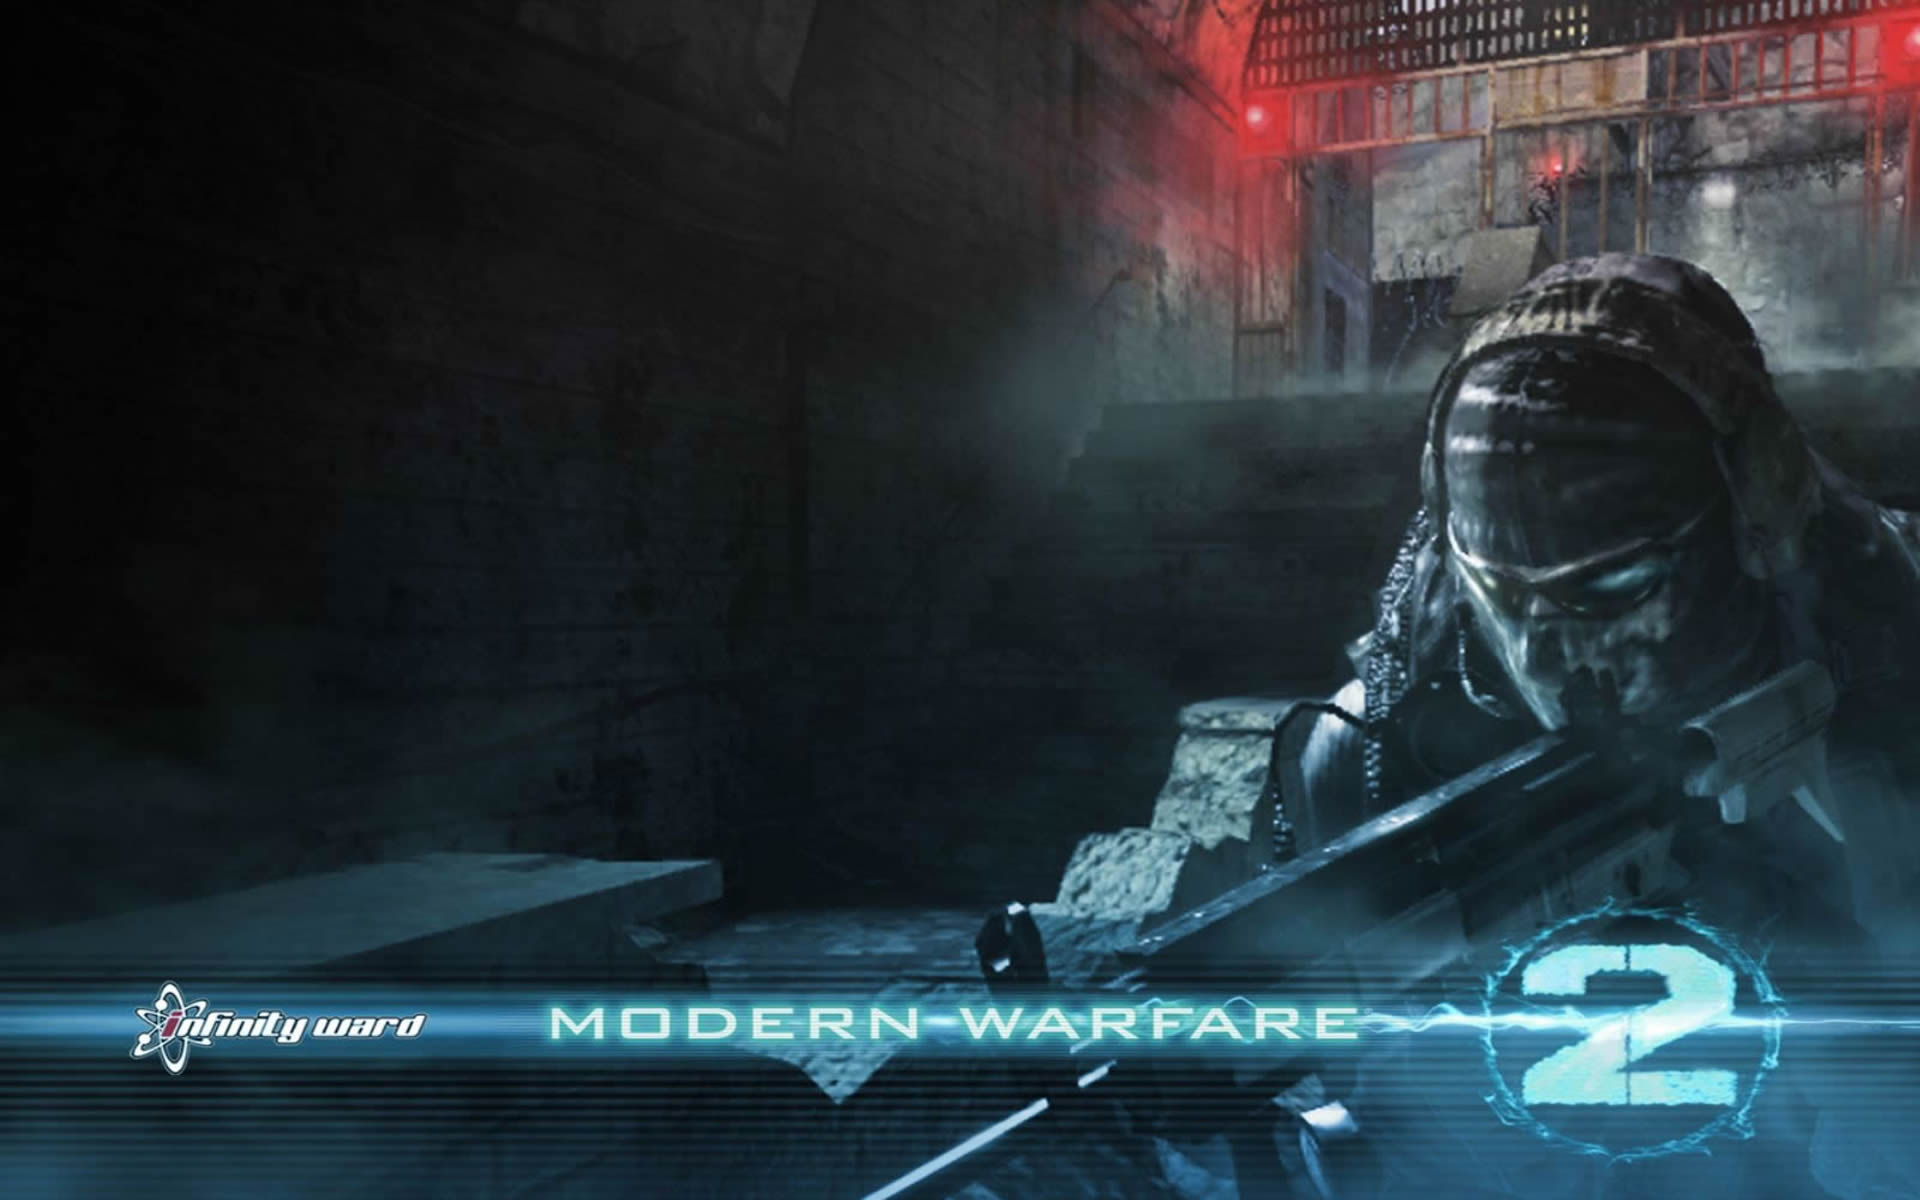 Stealth Sniper Action Games Wallpaper Image Featuring Call Of Duty